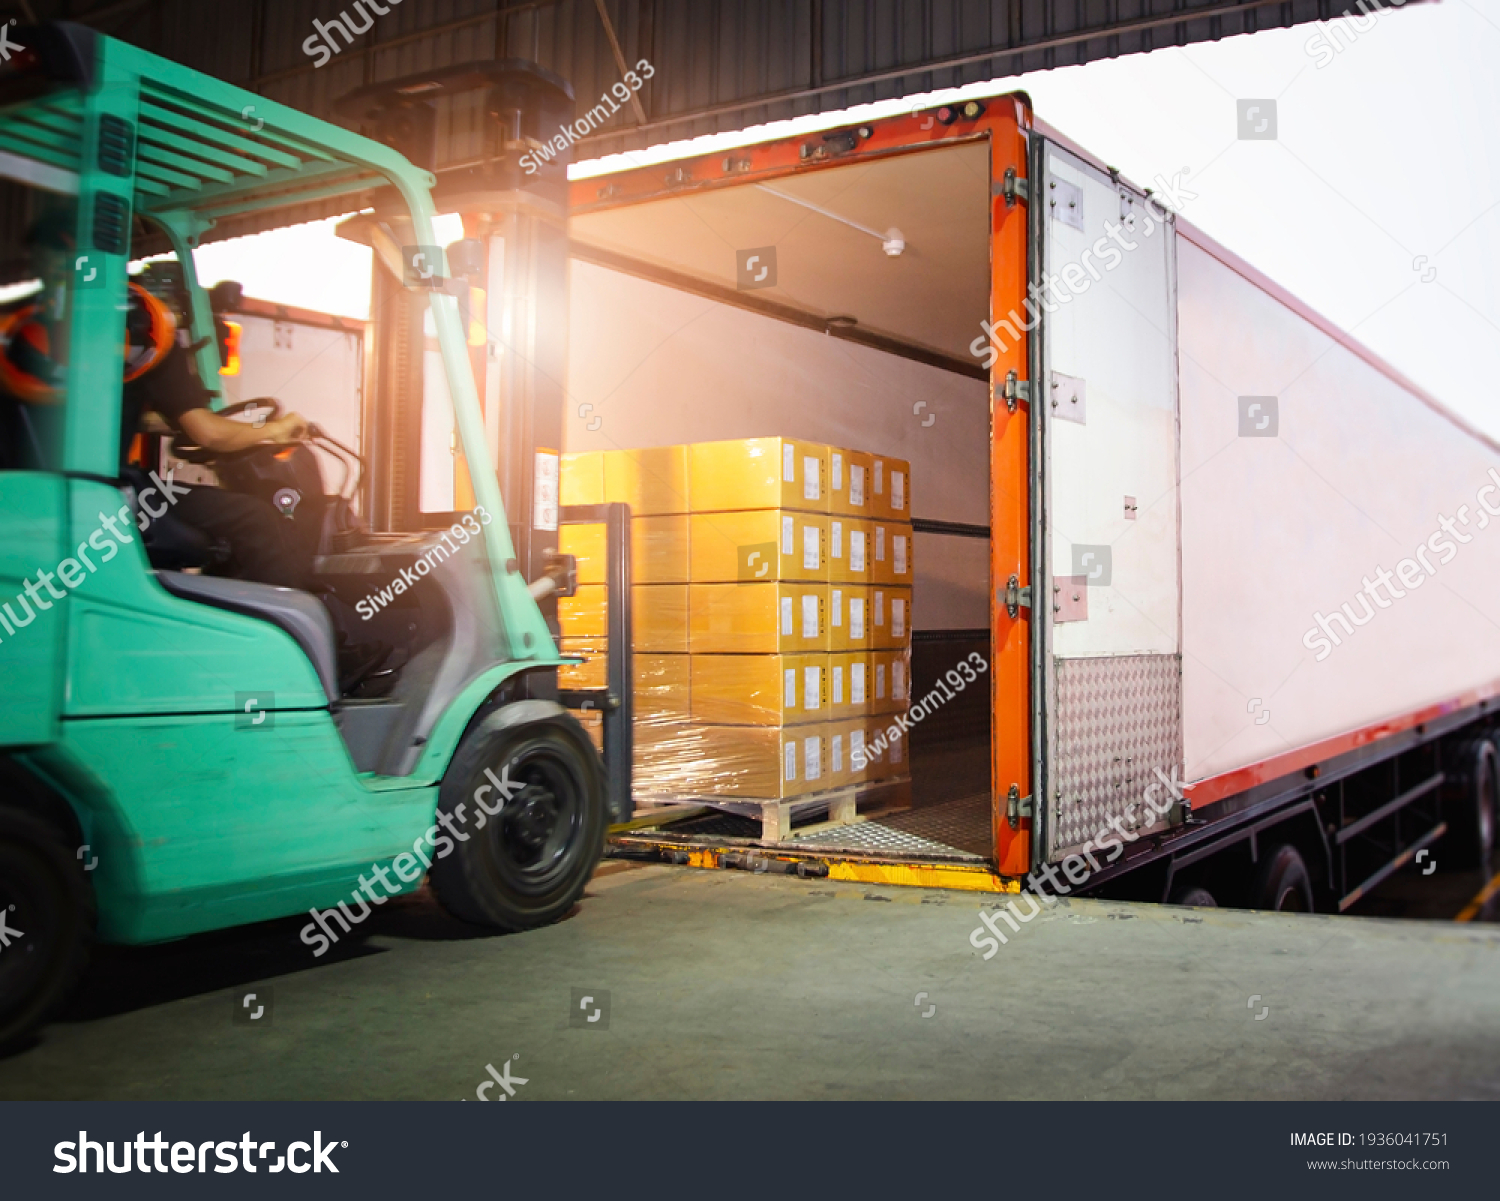 Forklift Tractor Loading Package Boxes into Cargo Container. TrailerTruck Parked Loading at Dock Warehouse. Shipment Delivery. Supply Chain. Shipping Warehouse Logistics Freight Truck Transportation. #1936041751